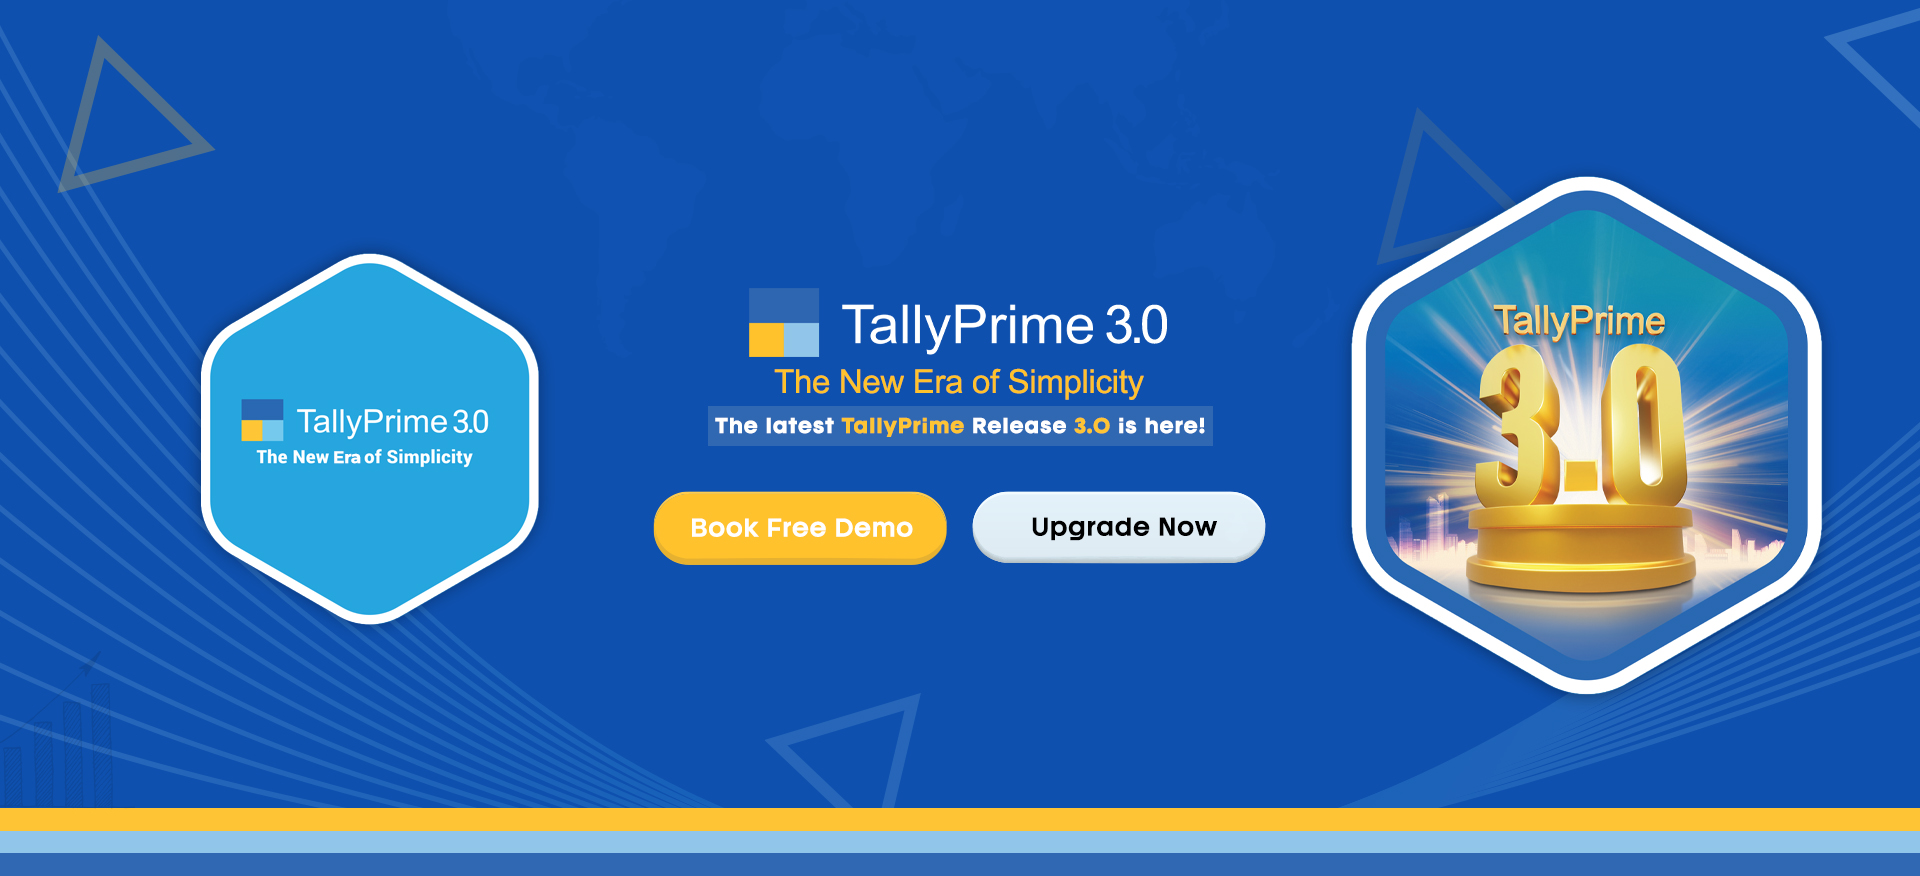 The tally prime released new version